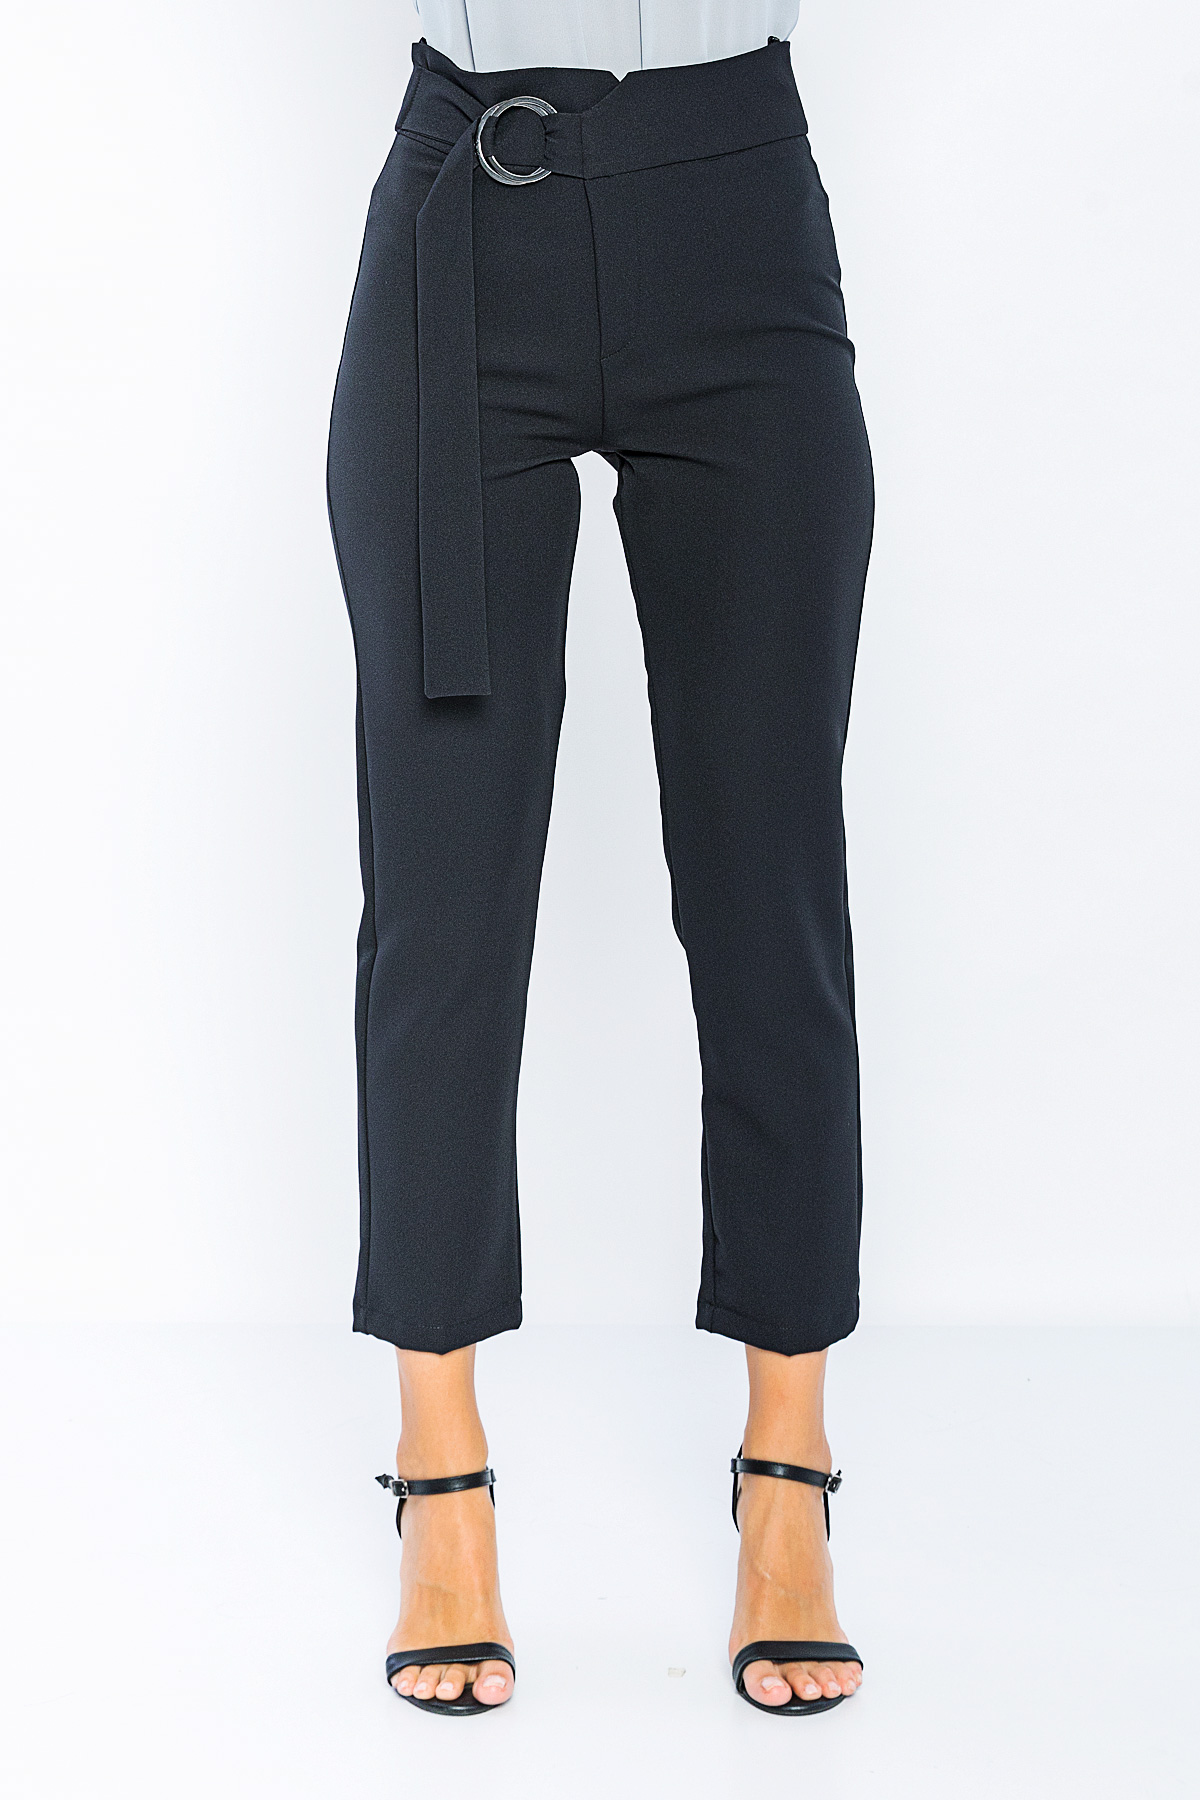 Picture of Woman Black High Waist Normal Trotter Work Trousers